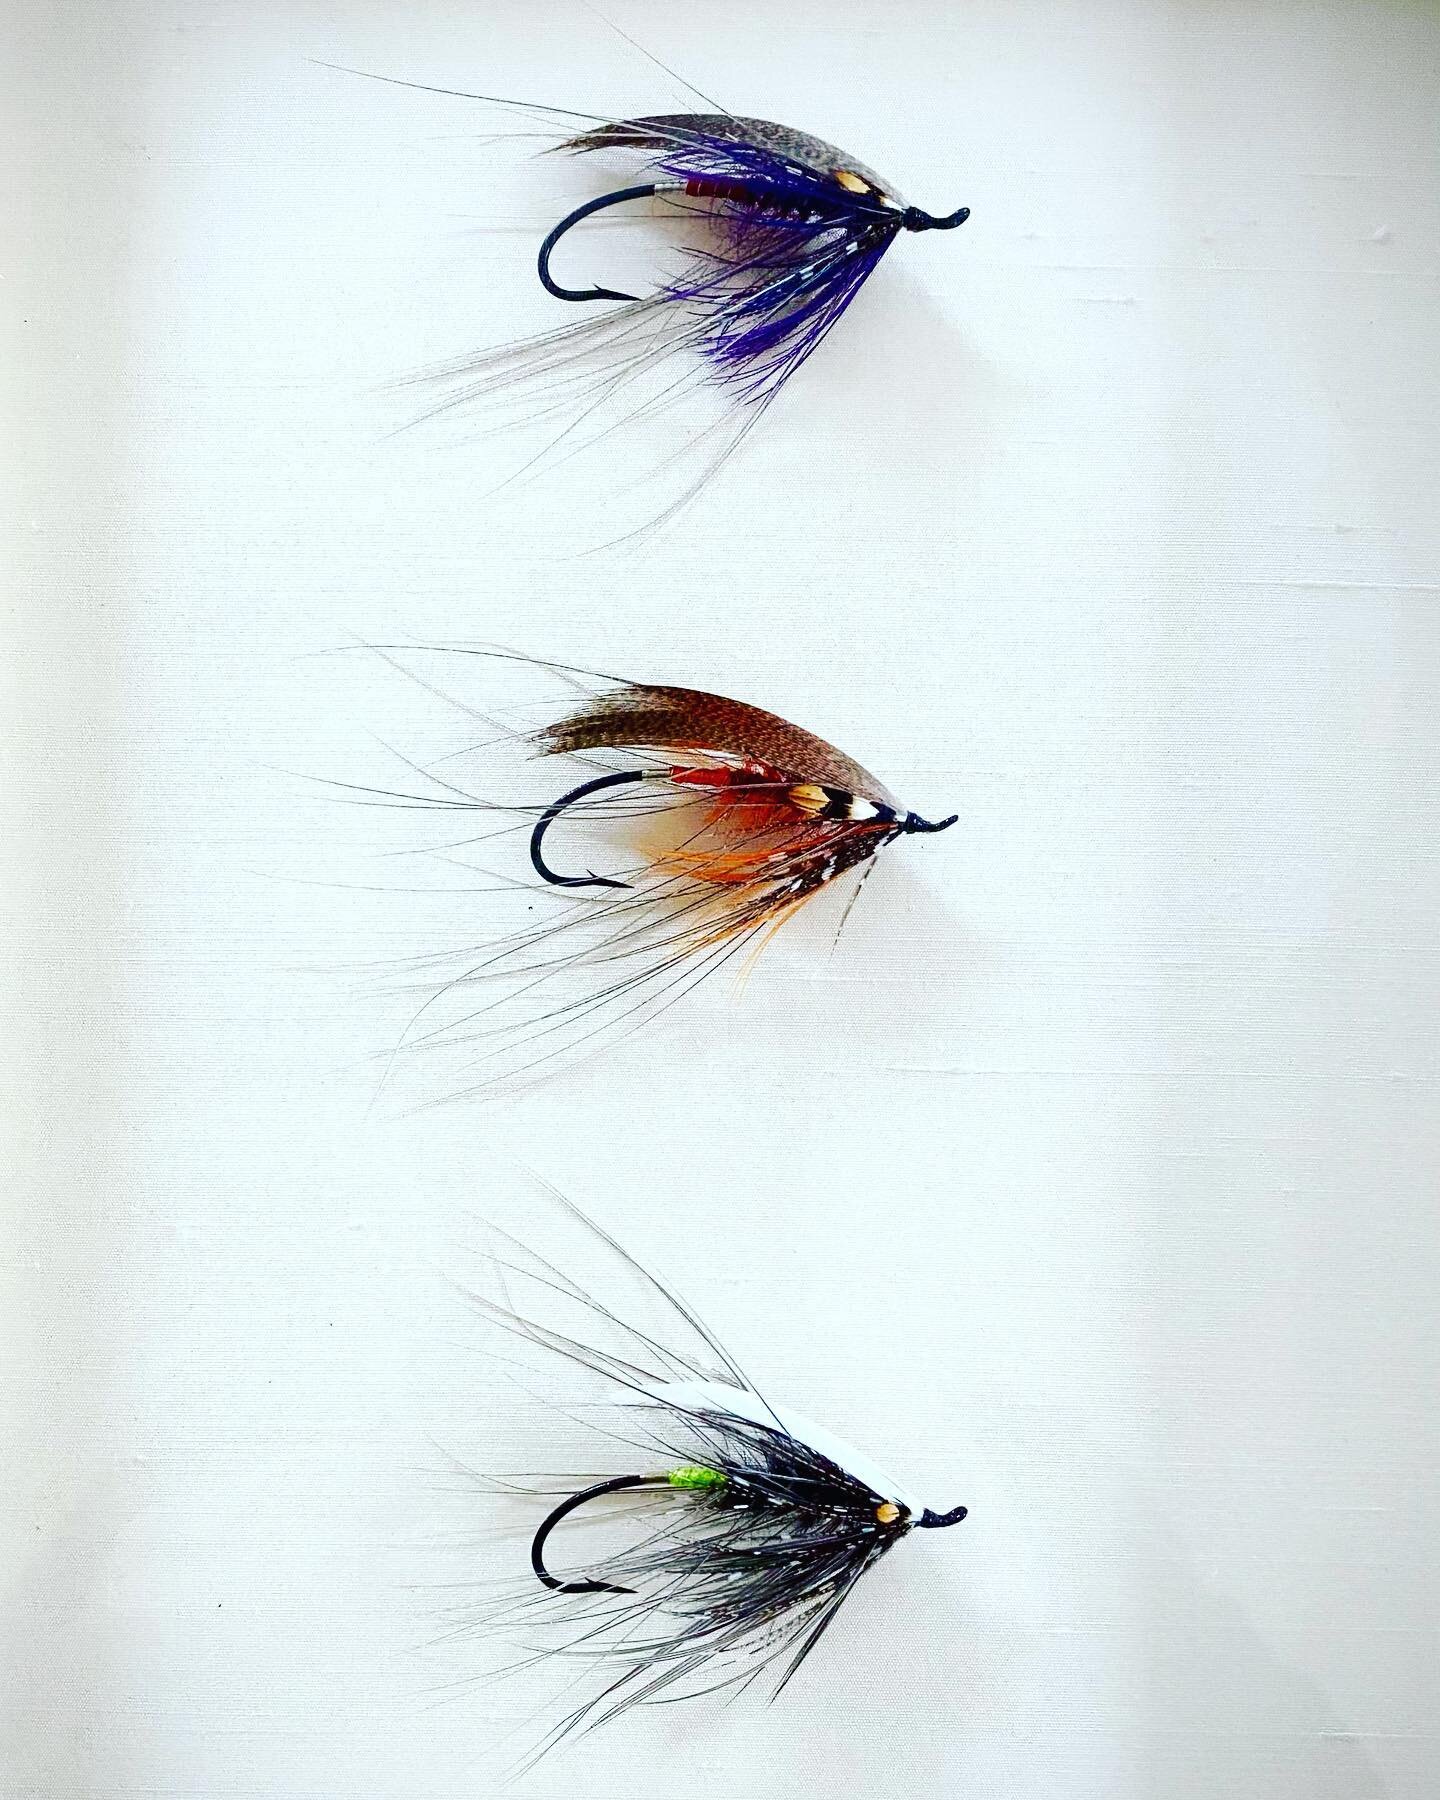 When I was a little kid, my dad made me a deal: He&rsquo;d buy me all the gear and materials to start tying flies if I &ldquo;paid him back&rdquo; by tying a certain number of flies for him. I think I probably fell well short of the agreed-upon numbe